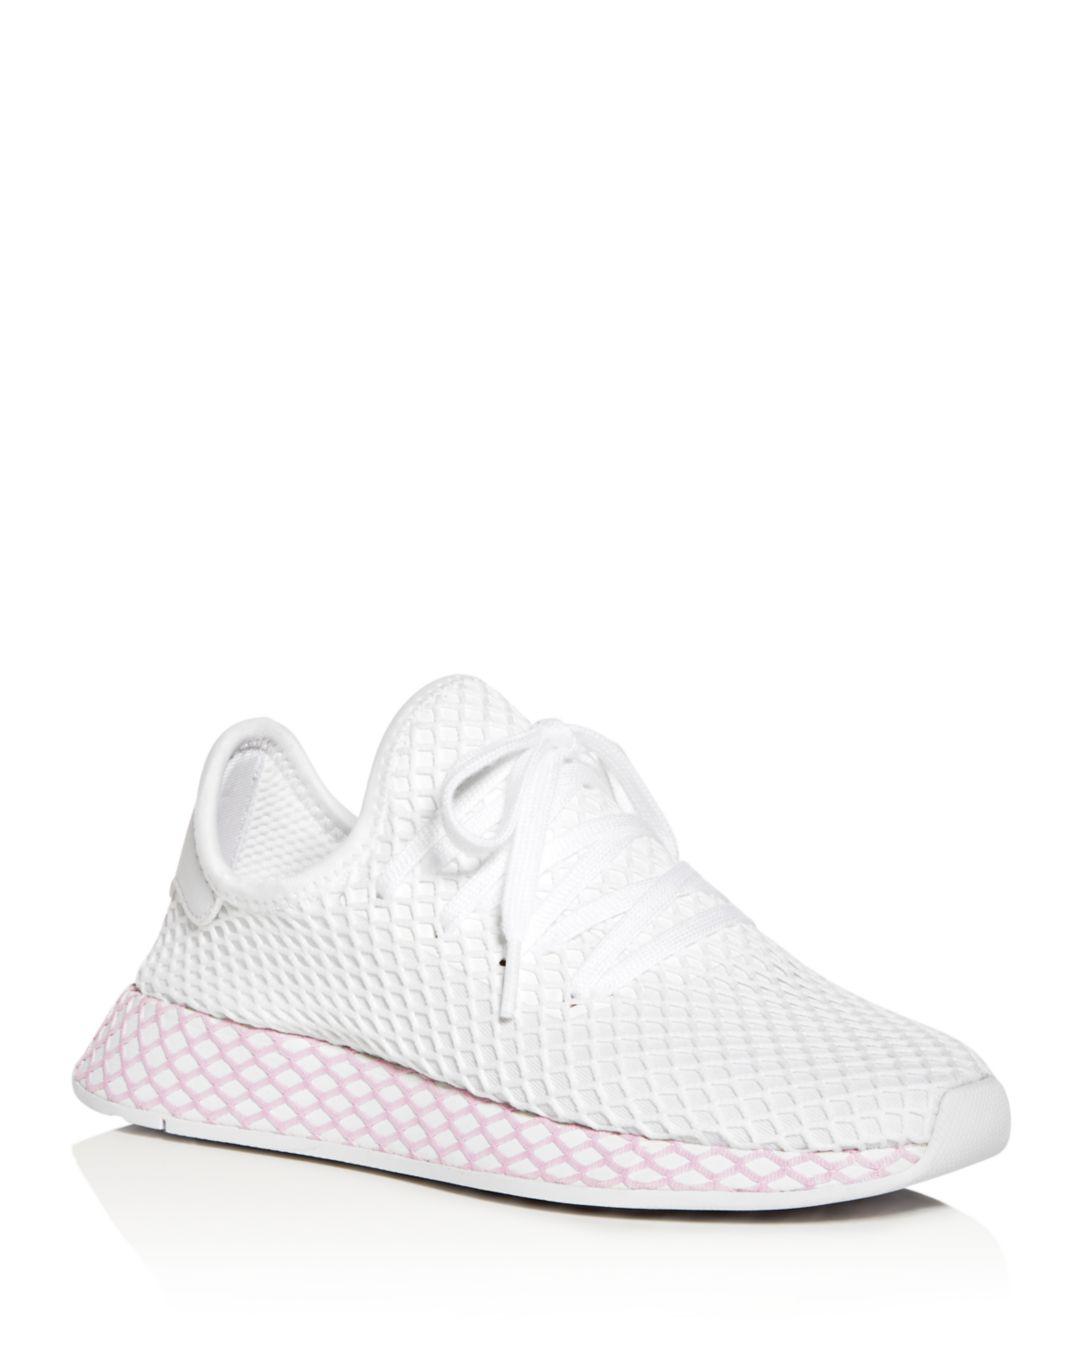 Felicidades Tiza doloroso adidas Women's Deerupt Net Lace Up Sneakers in White | Lyst